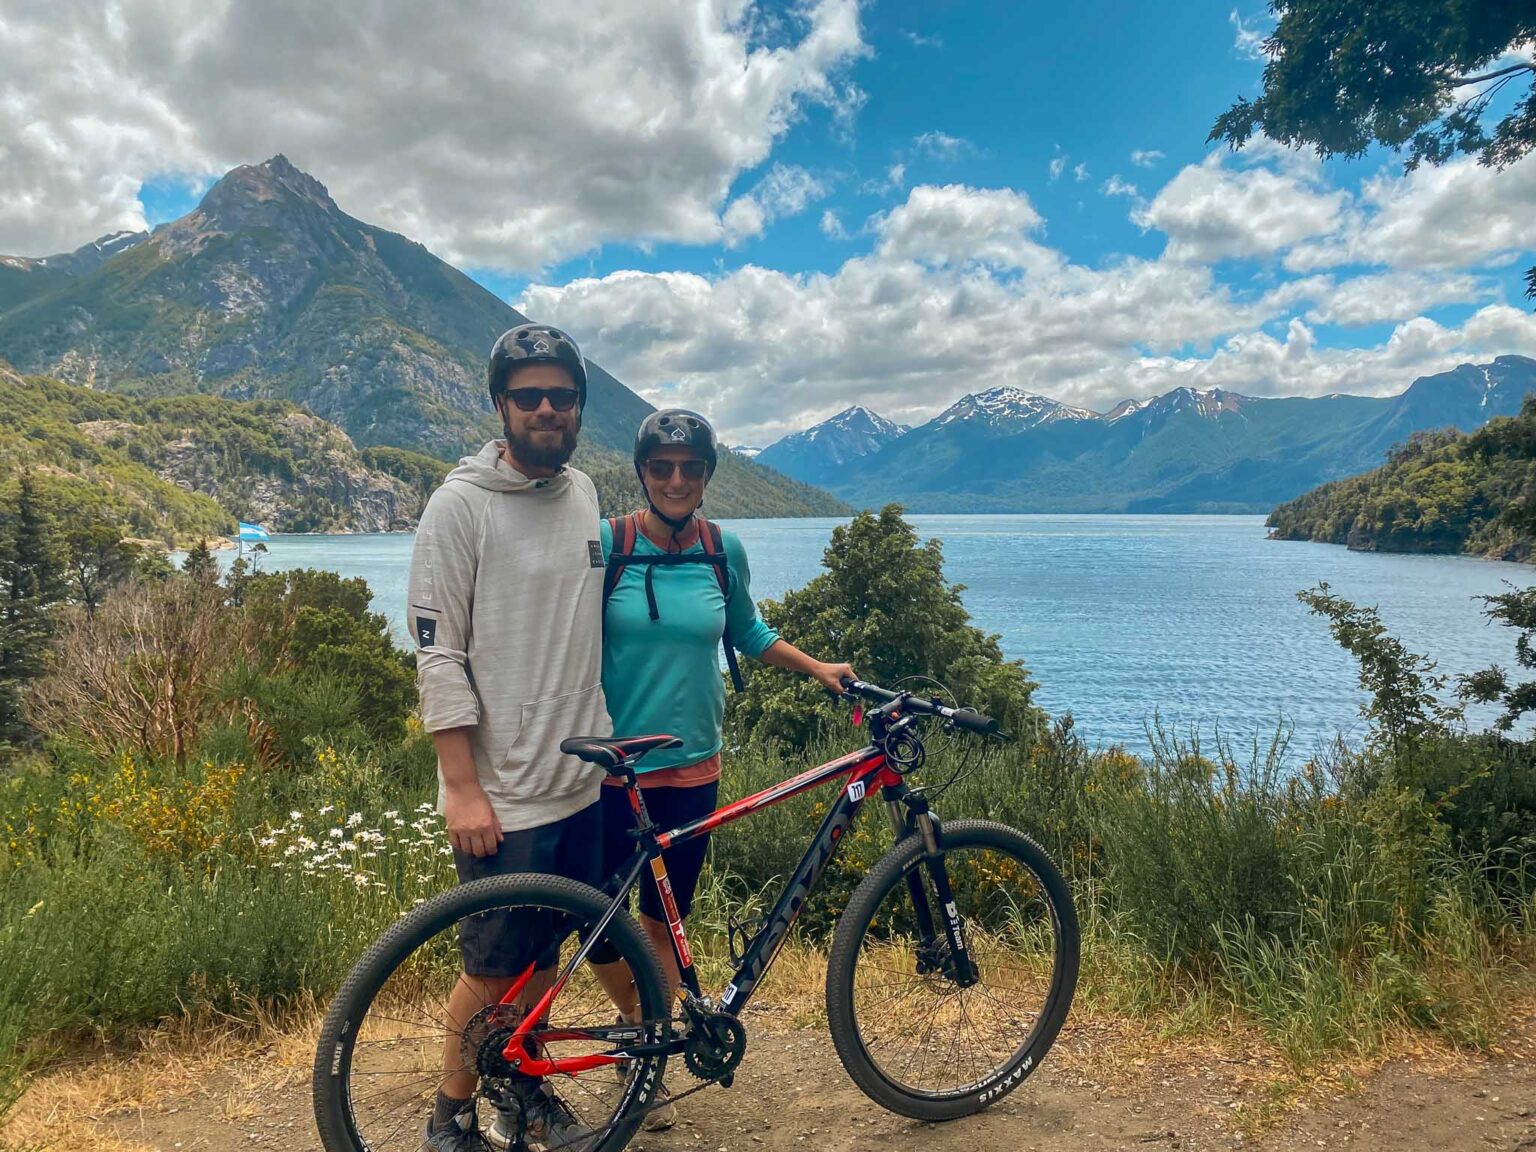 Young couple poses with mountain bike wearing helmets in front of picturesque background of lake and mountains. Human-powered is the most sustainable type of recreation.